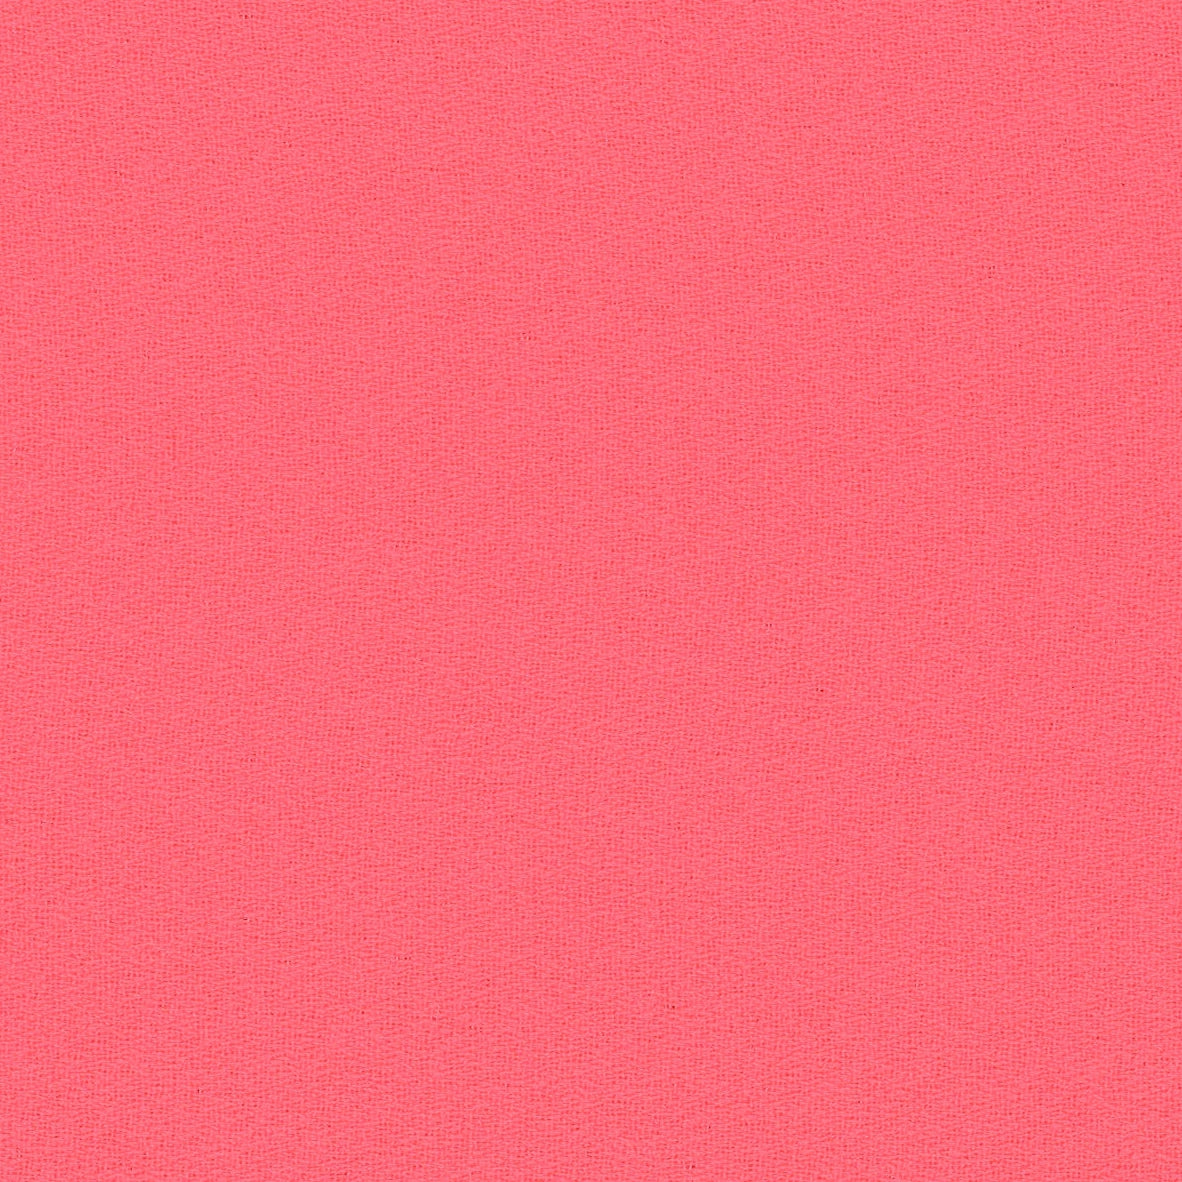 35001-02 Pink Crepe Plain Dyed Blend 315g/yd 54" crepe pink plain dyed polyester woven Solid Color - knit fabric - woven fabric - fabric company - fabric wholesale - fabric b2b - fabric factory - high quality fabric - hong kong fabric - fabric hk - acetate fabric - cotton fabric - linen fabric - metallic fabric - nylon fabric - polyester fabric - spandex fabric - chun wing hing - cwh hk - fabric worldwide ship - 針織布 - 梳織布 - 布料公司- 布料批發 - 香港布料 - 秦榮興